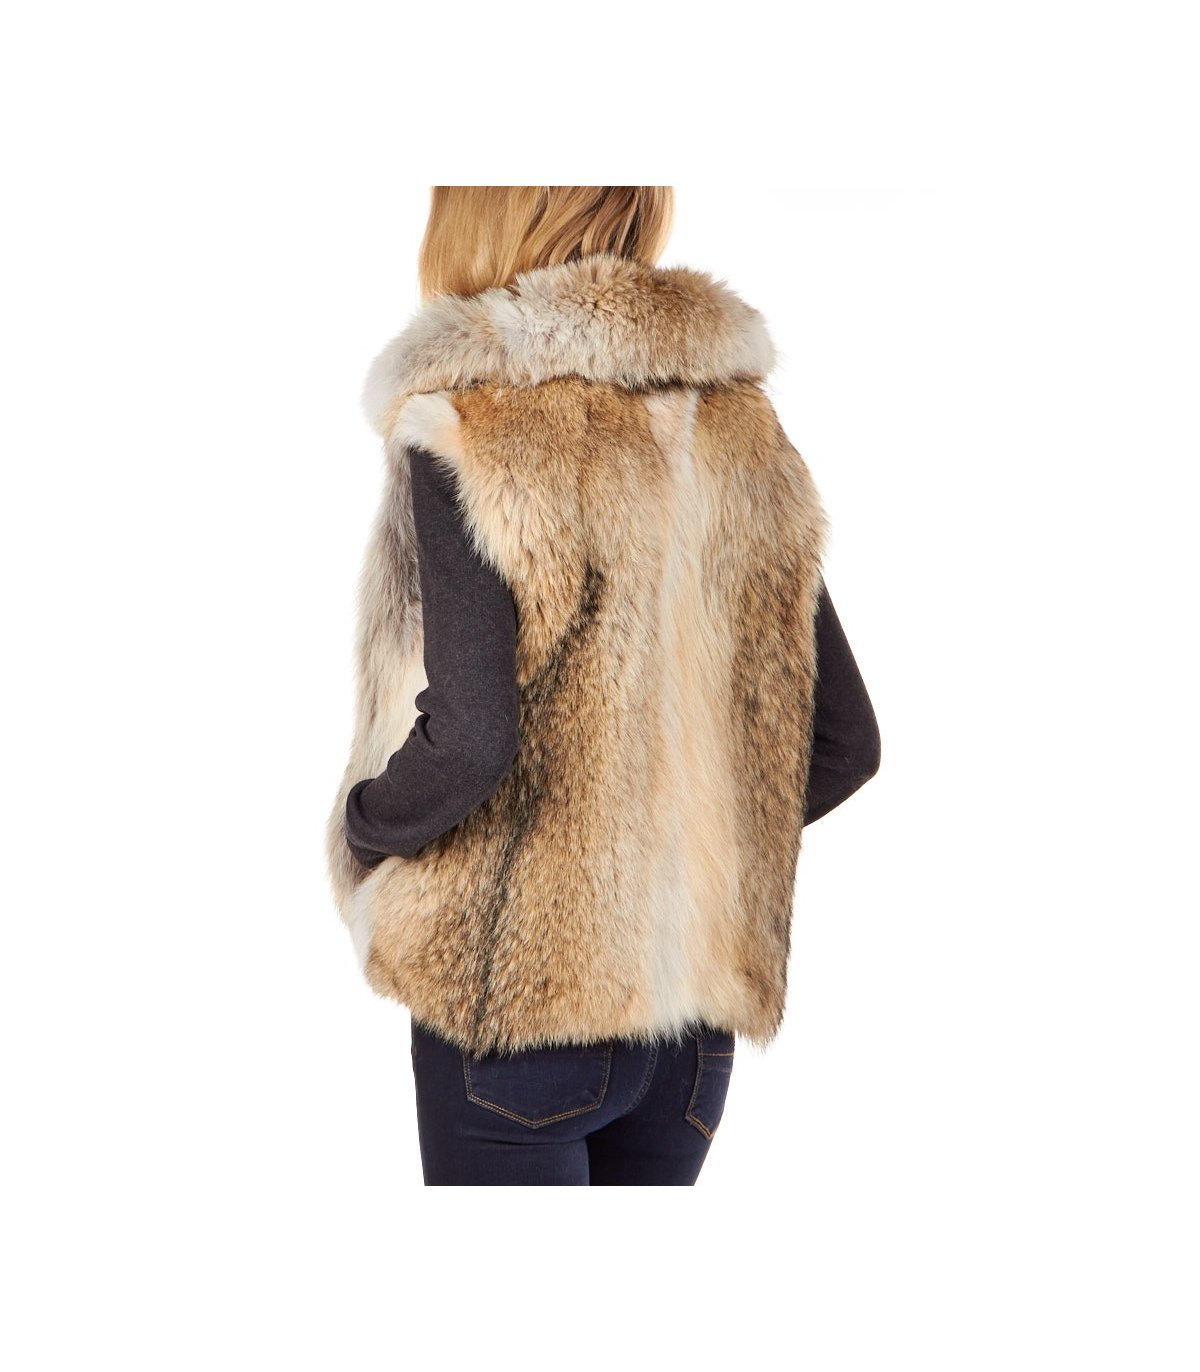 The Coyote Fur Vest With Collar For Women